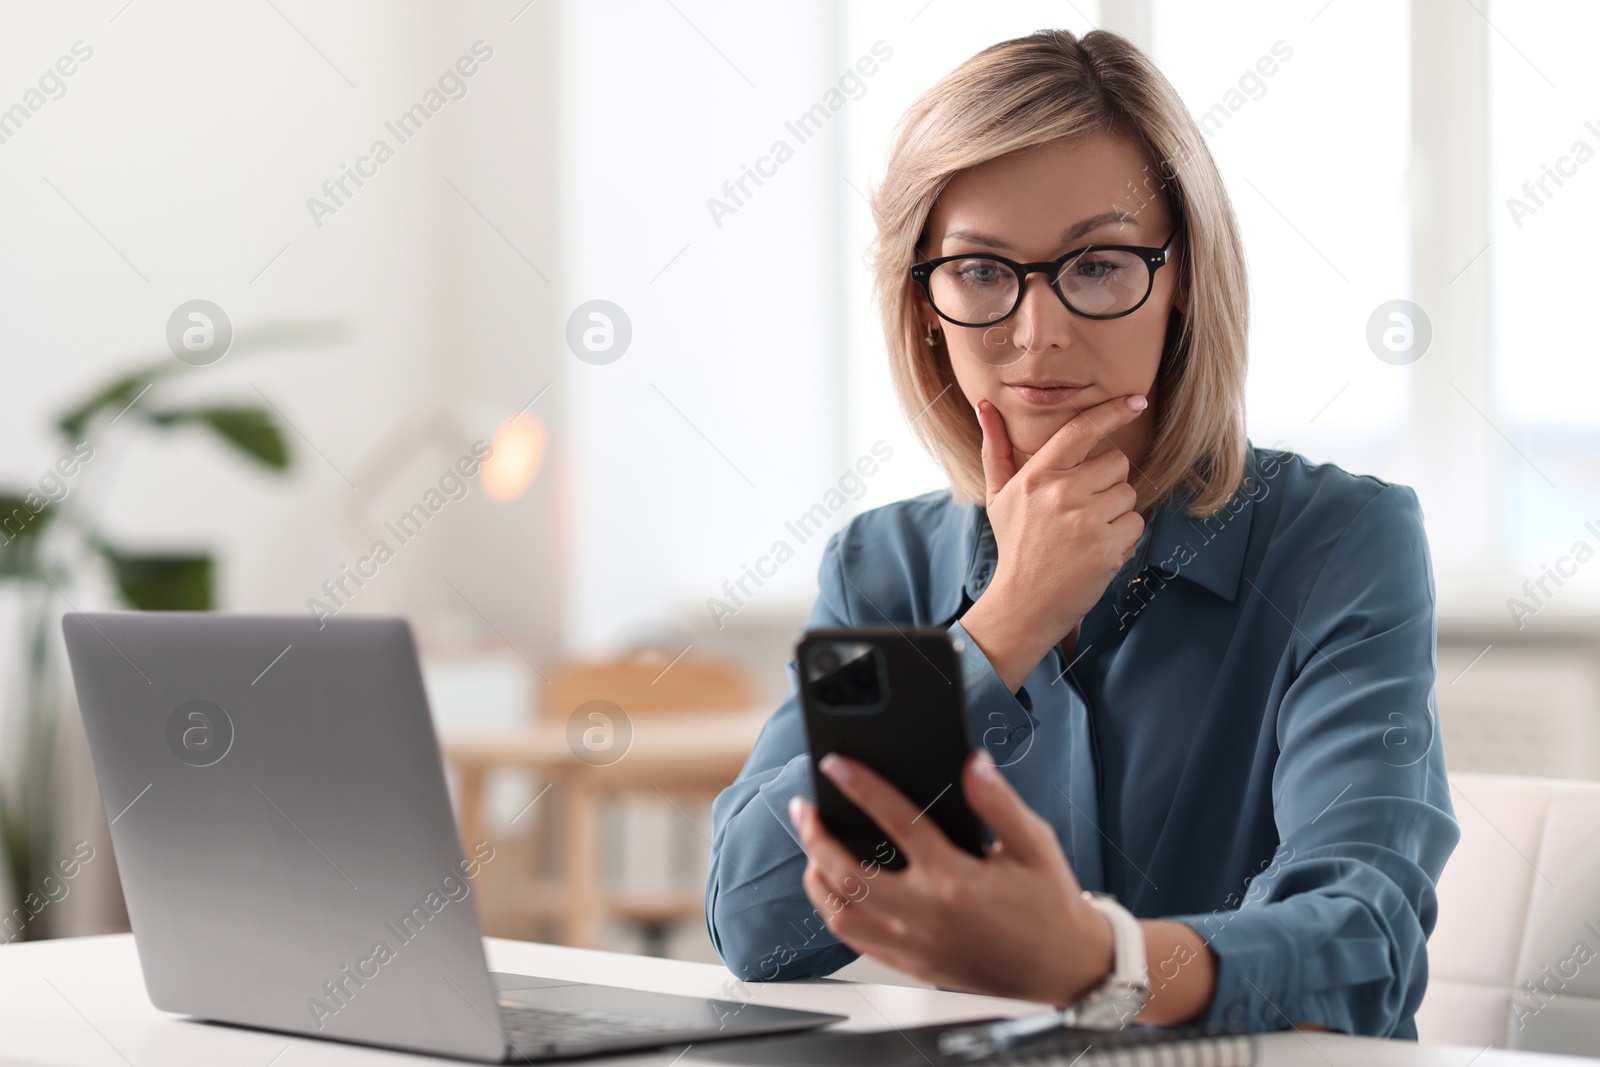 Photo of Woman using mobile phone at white table indoors